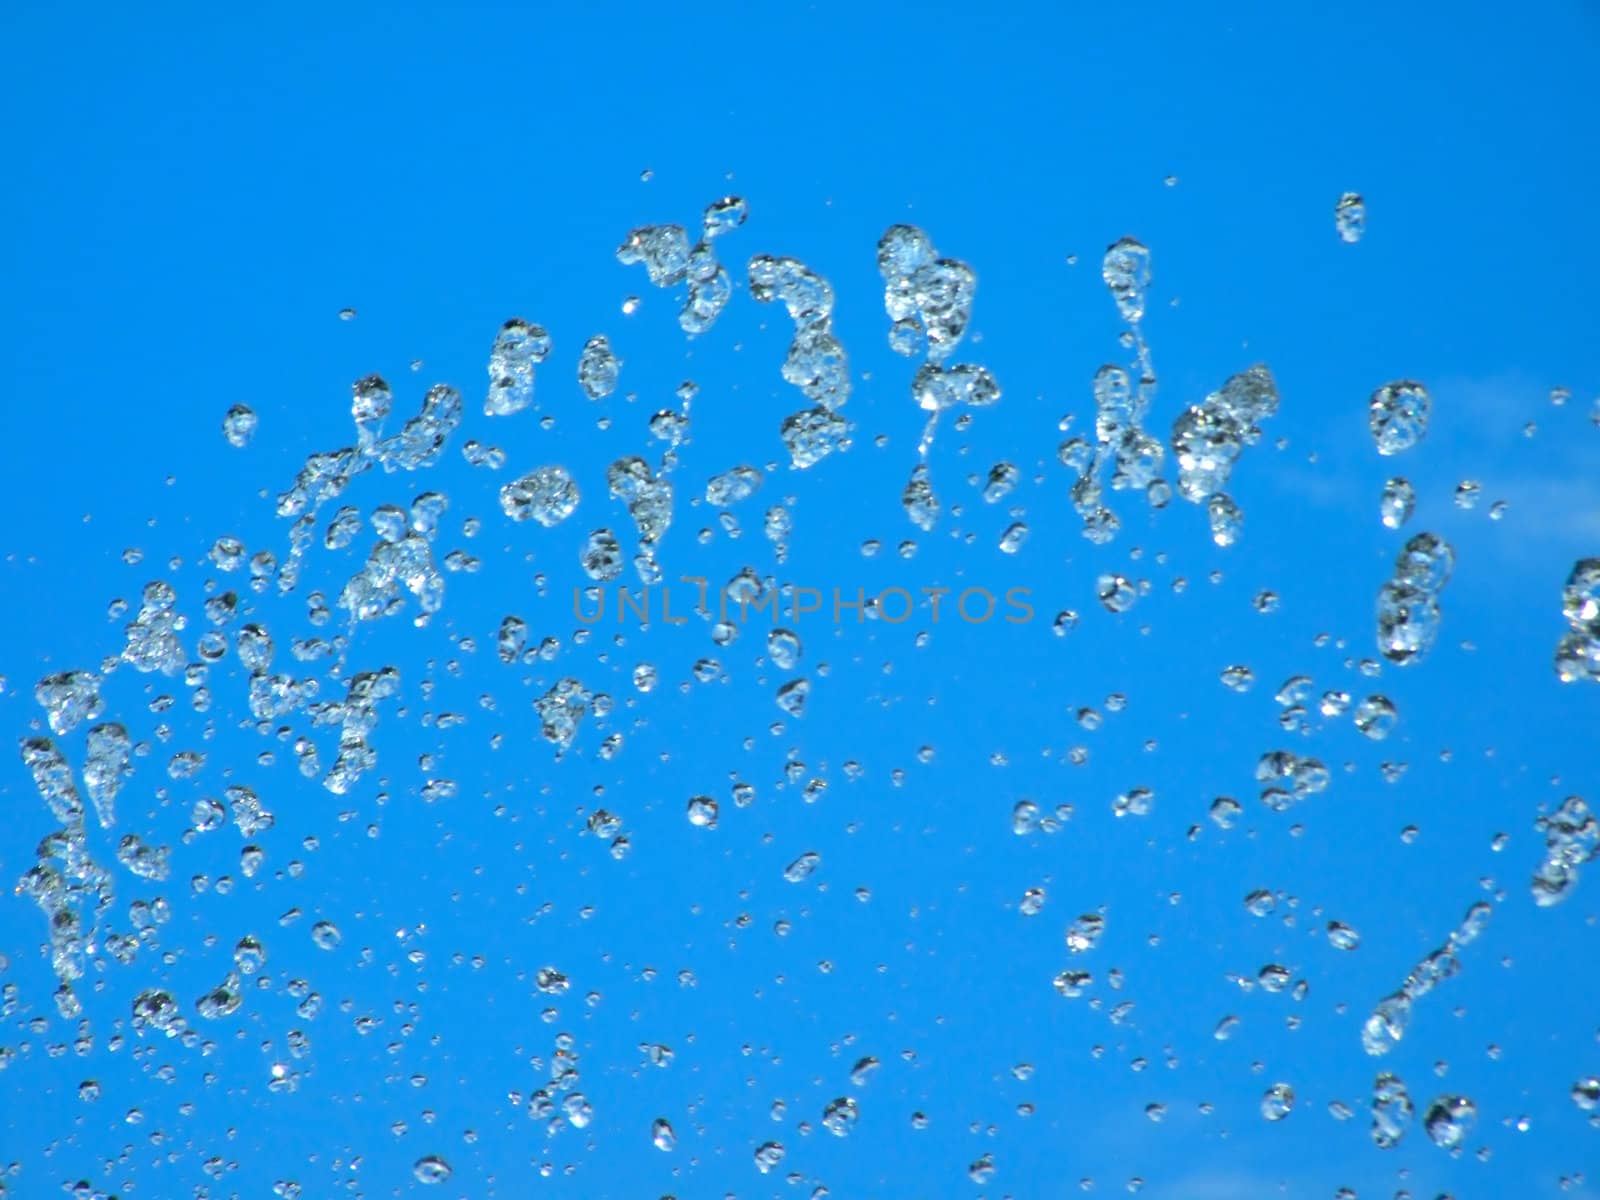 Splashes of a fountain against the blue sky